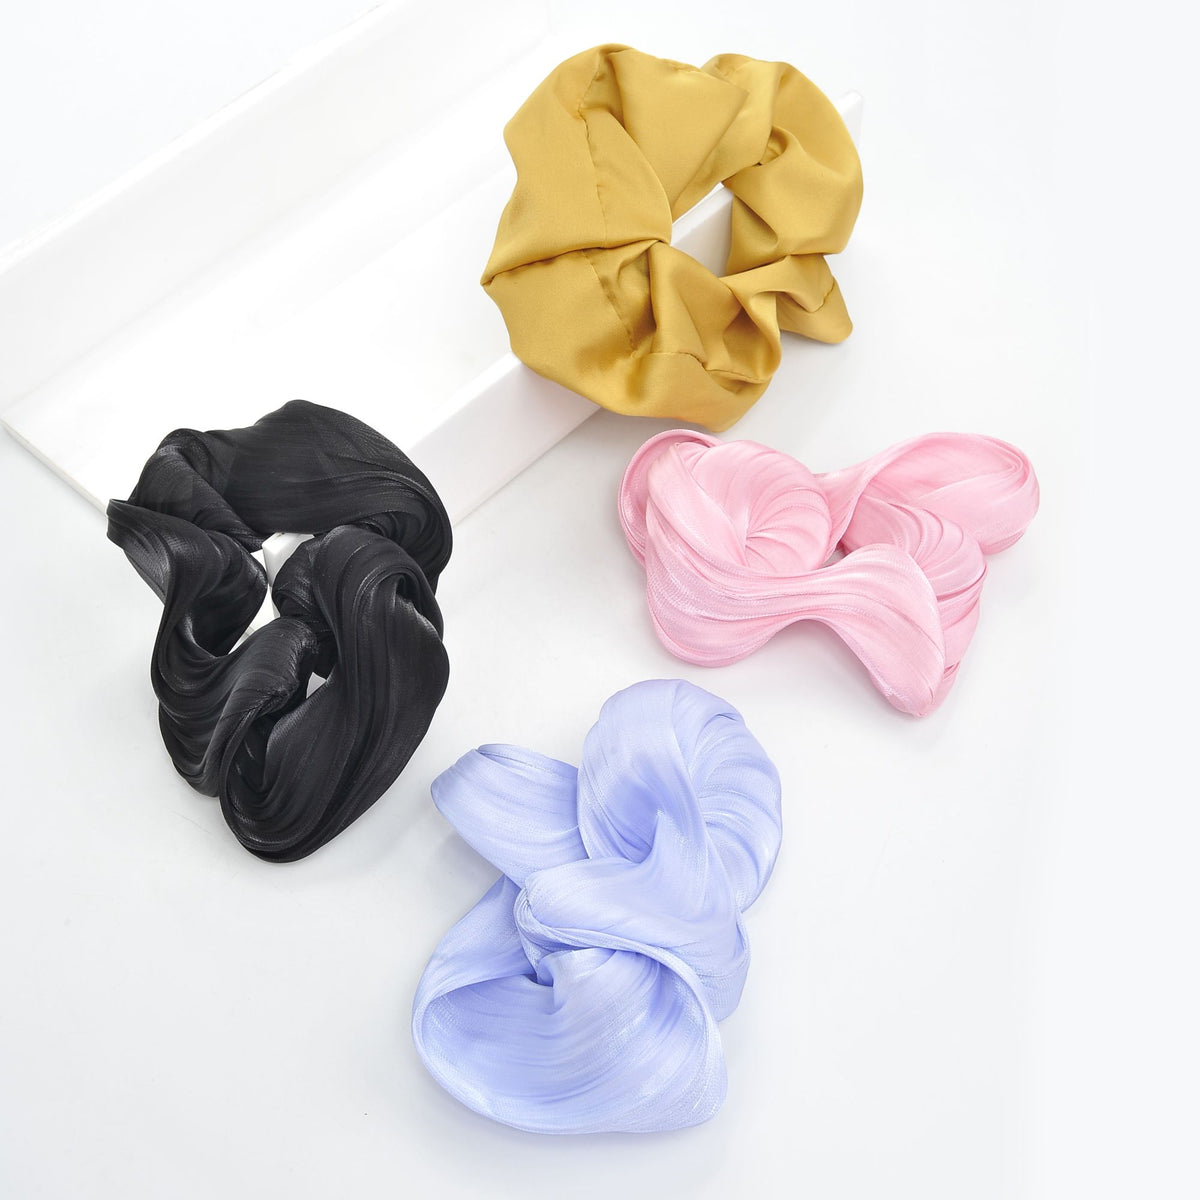 Urban Expressions Scrunchie - Assorted 4 Pack Accessories : Hair Accessories : Scrunchie 818209014359 | Black Yellow Sky Blue Pink